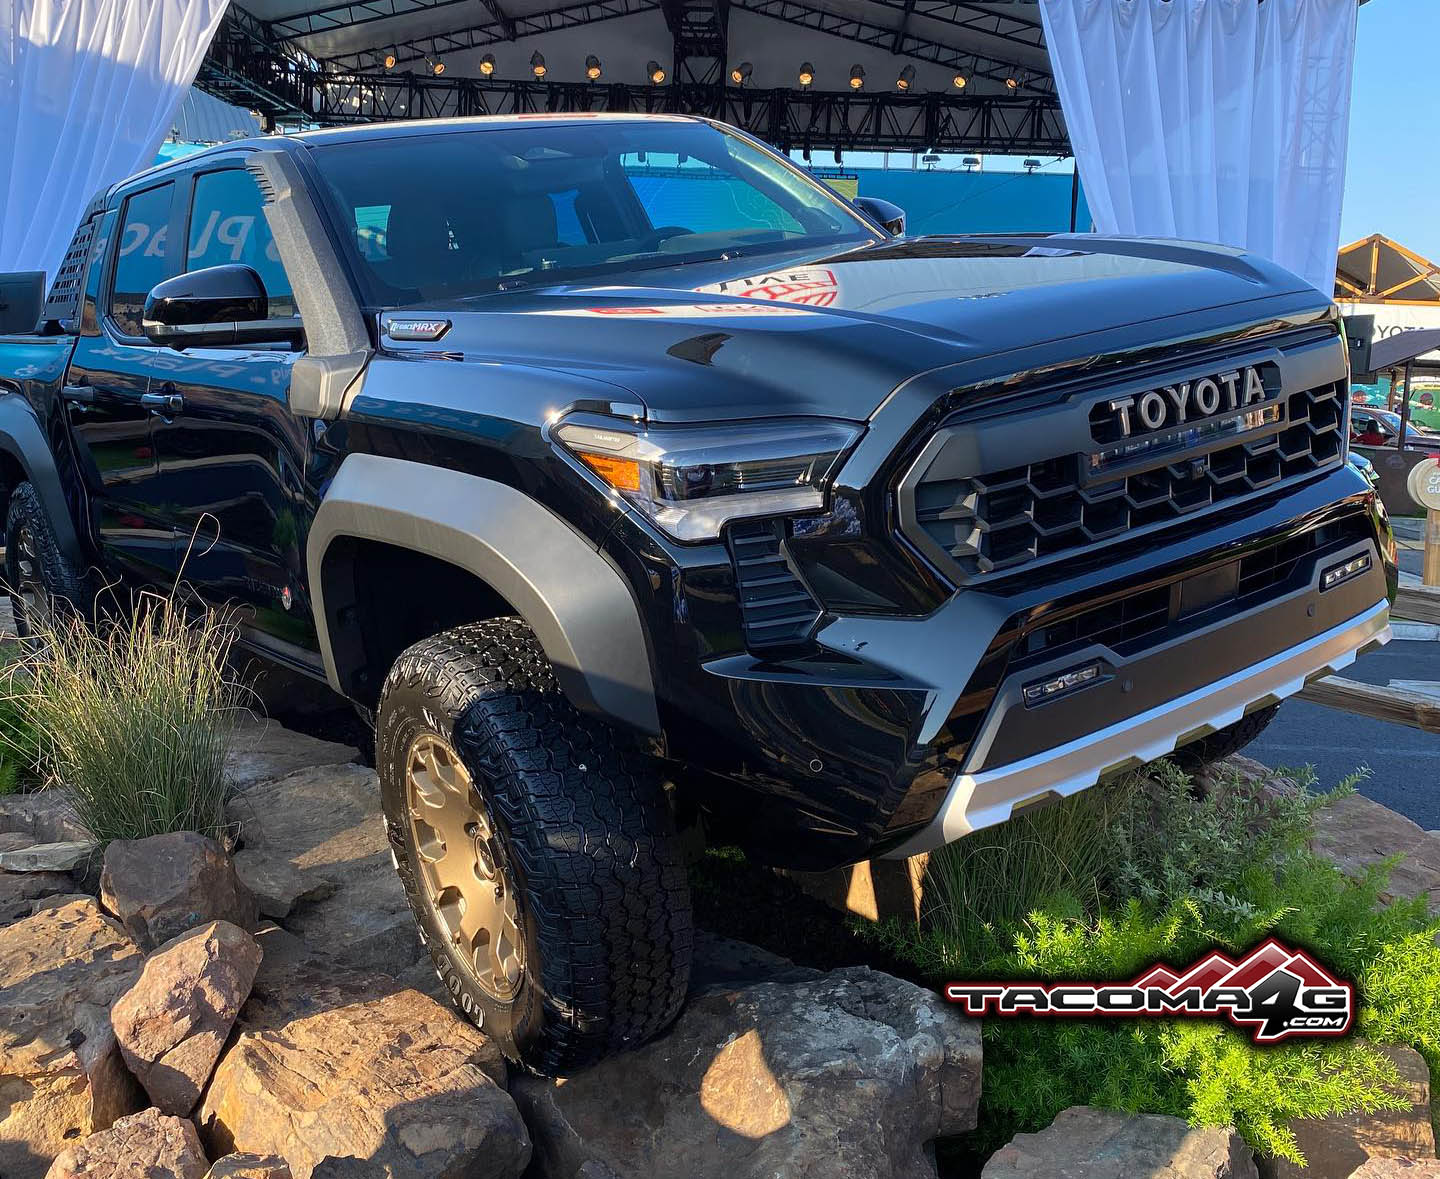 2024 Tacoma First Look: Black 2024 Tacoma TRD Pro. + Trailhunters in Black and Bronze Oxide Short Bed🤩 BLACK 2024 Tacoma Trailhunter 4